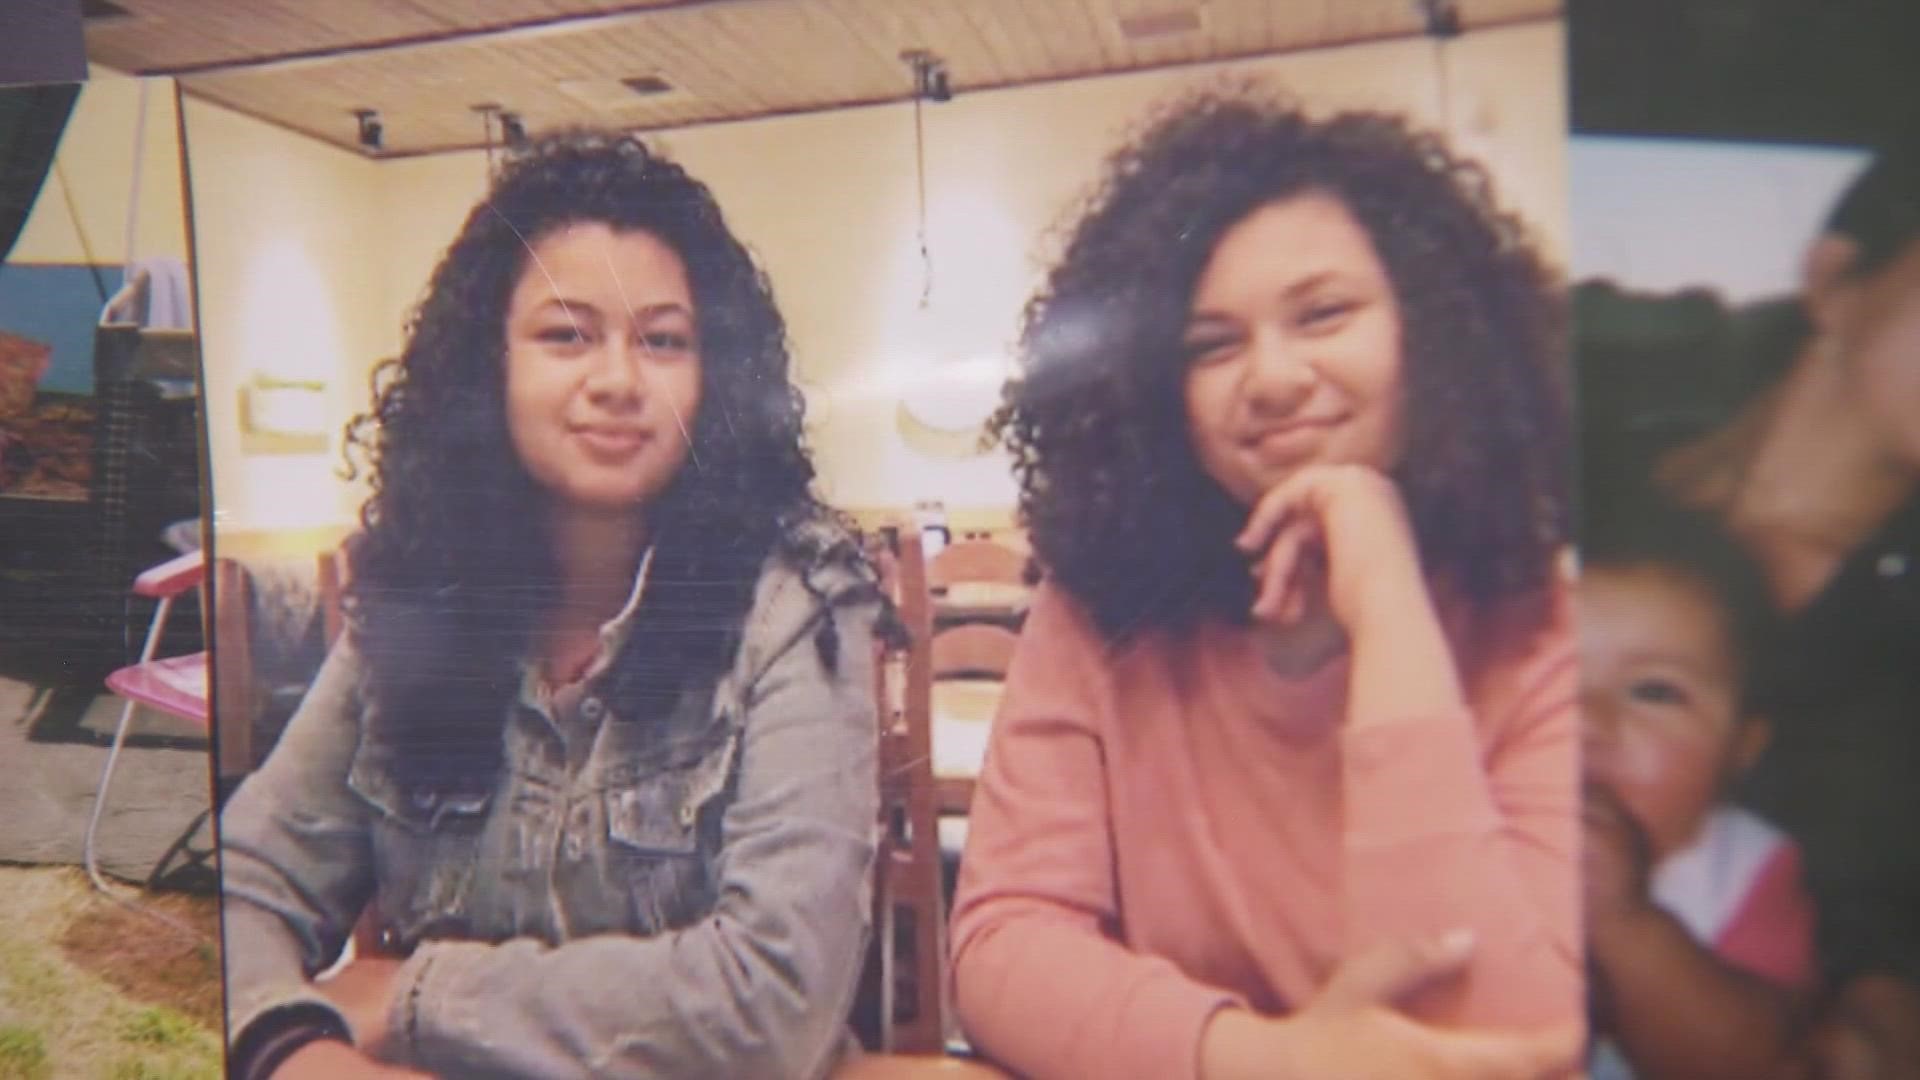 The King County medical examiner ruled the teen sister's manner of death "undetermined" saying there wasn't a way to tell their state of mind or intent.